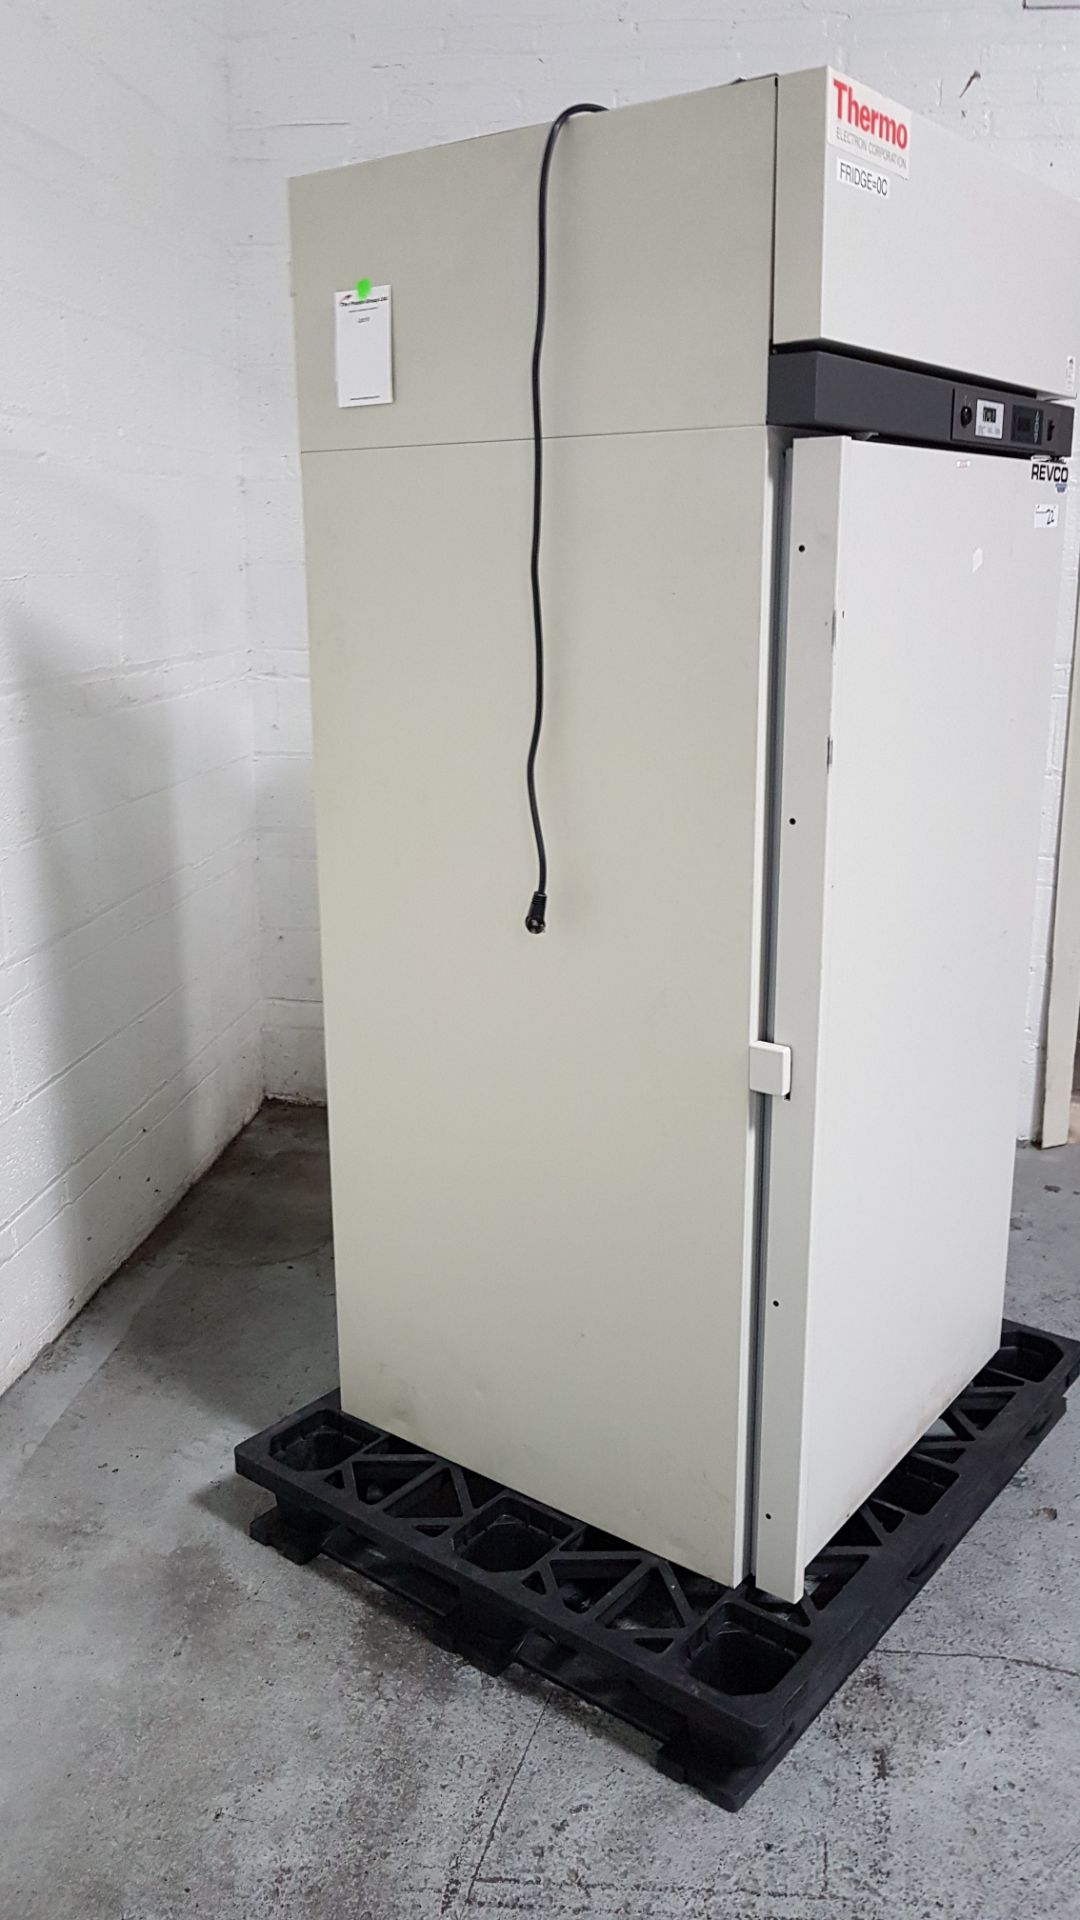 Thermo Electron freezer, model REL3004A21, 29" W x 26" D x 52"H chamber, 115 volts. - Image 3 of 18